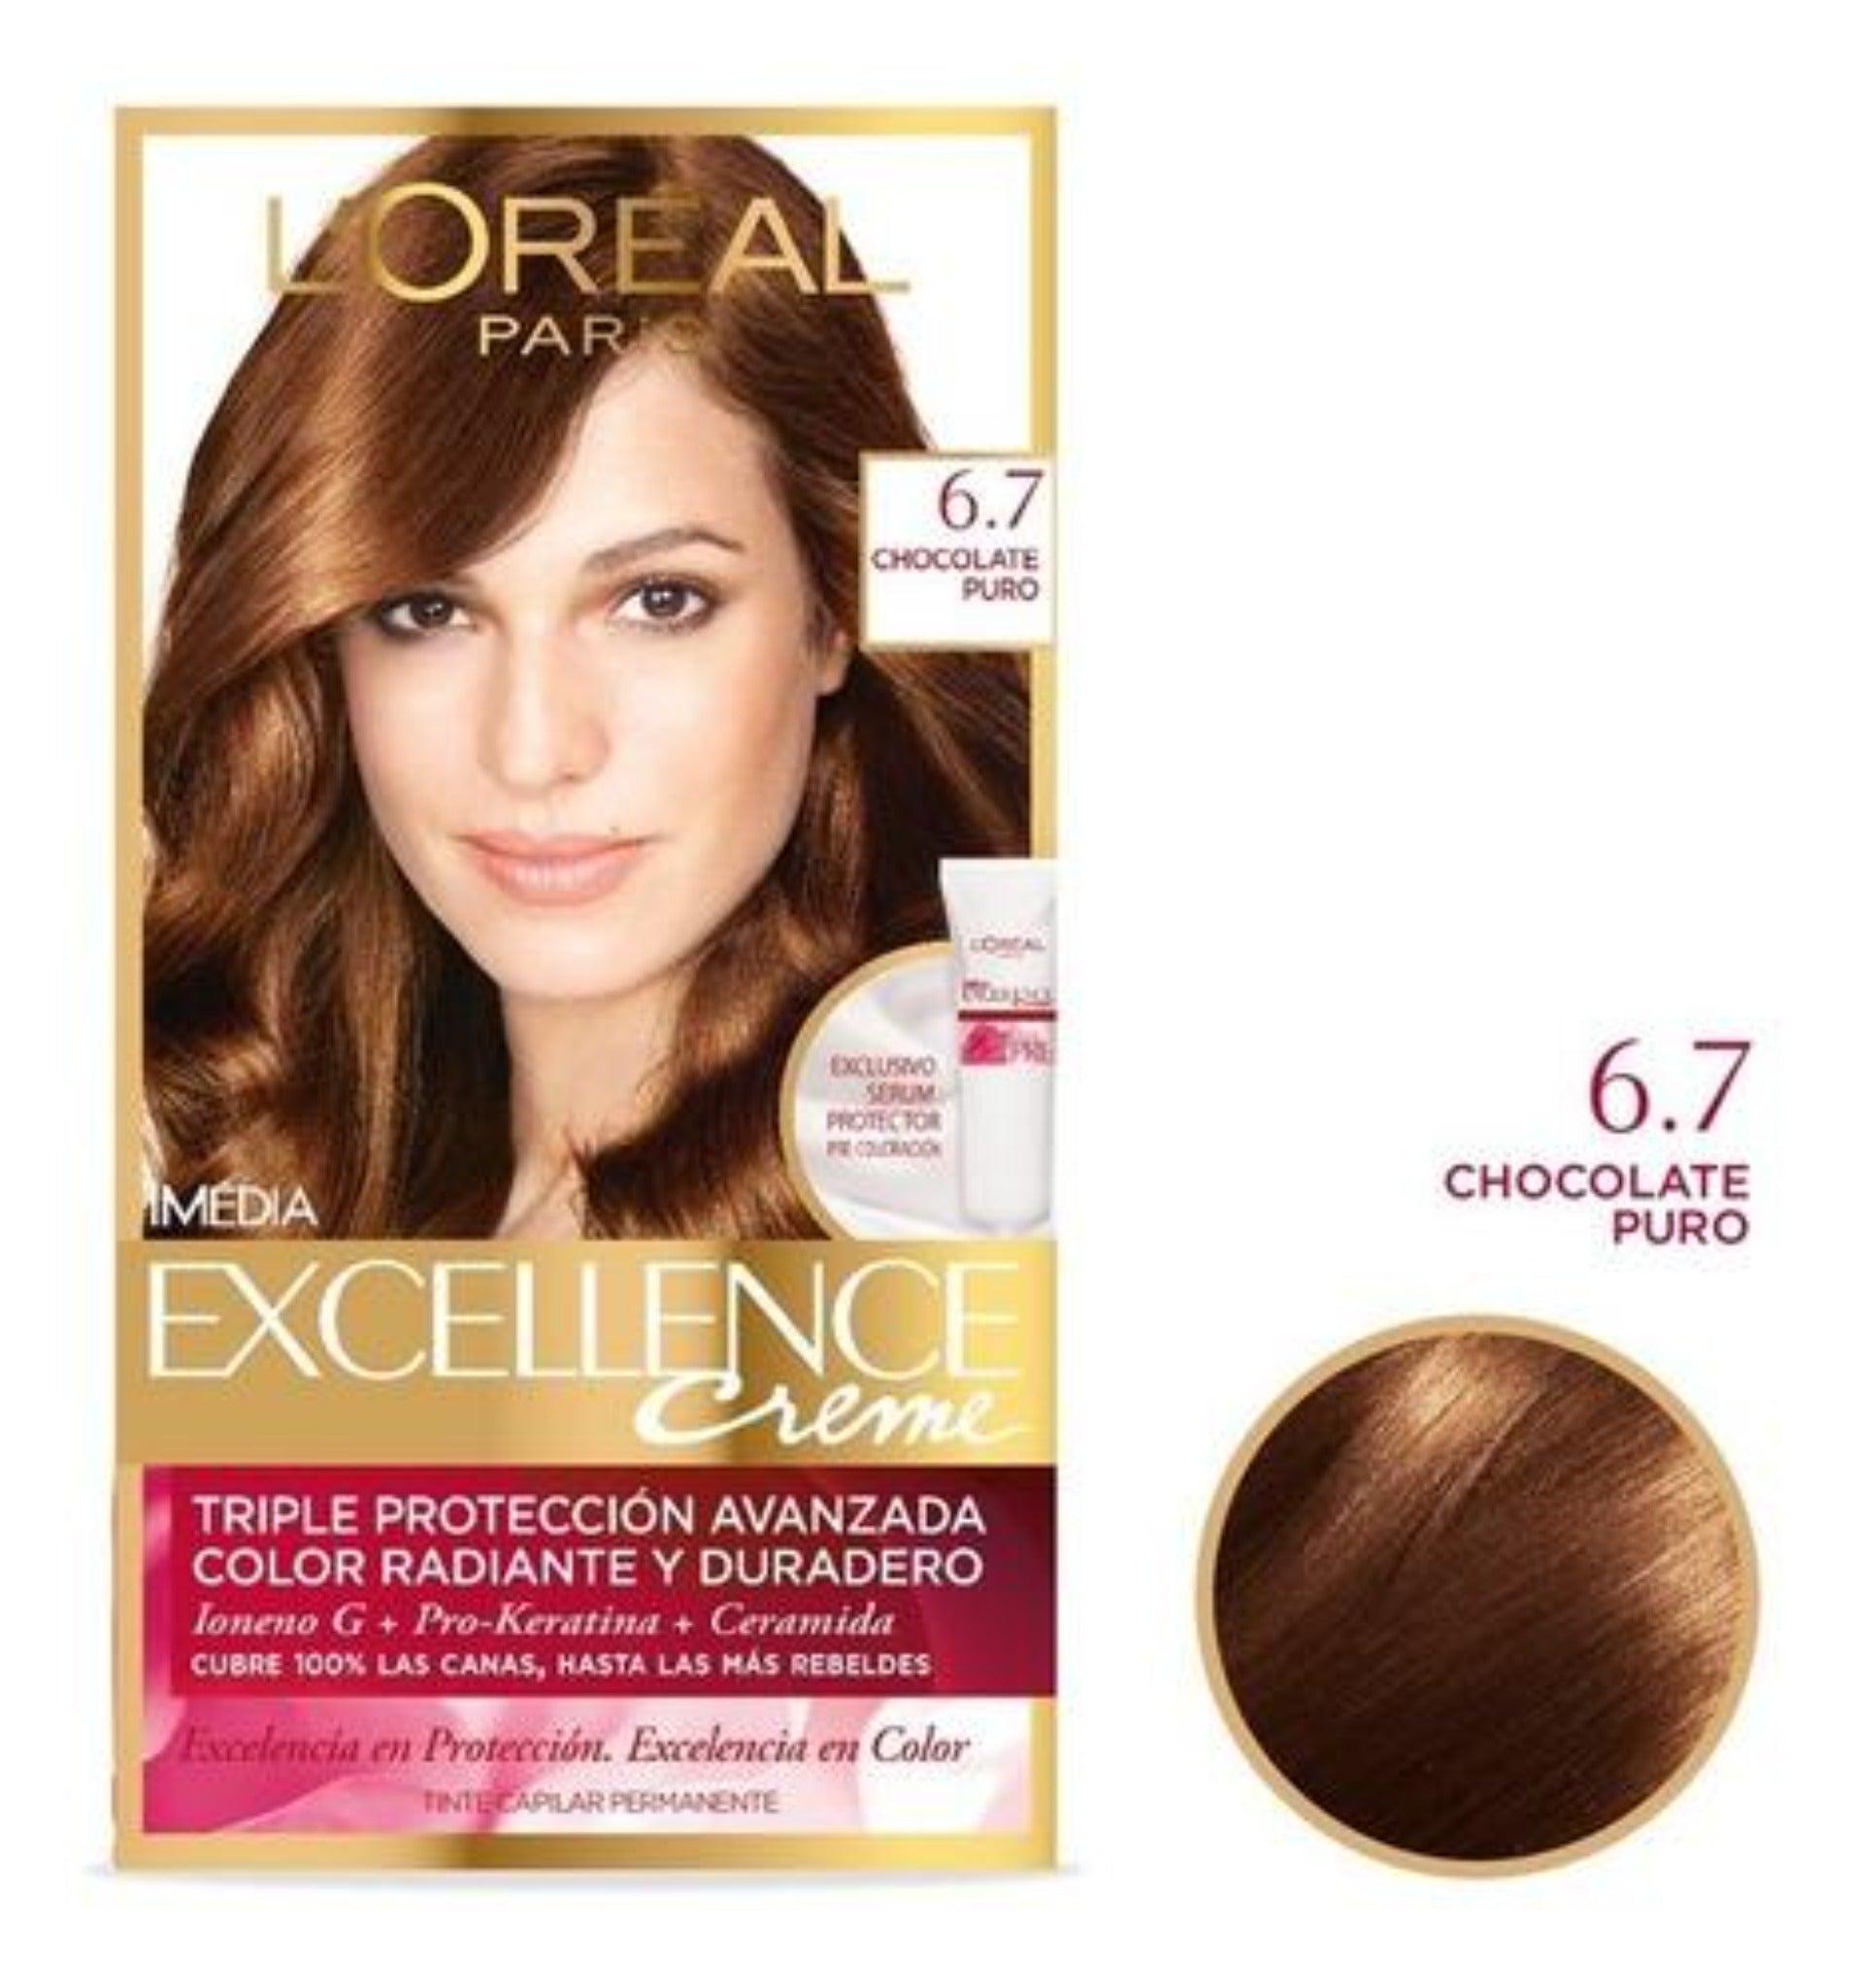 L’Oreal Excellence 6.7 Pure Chocolate